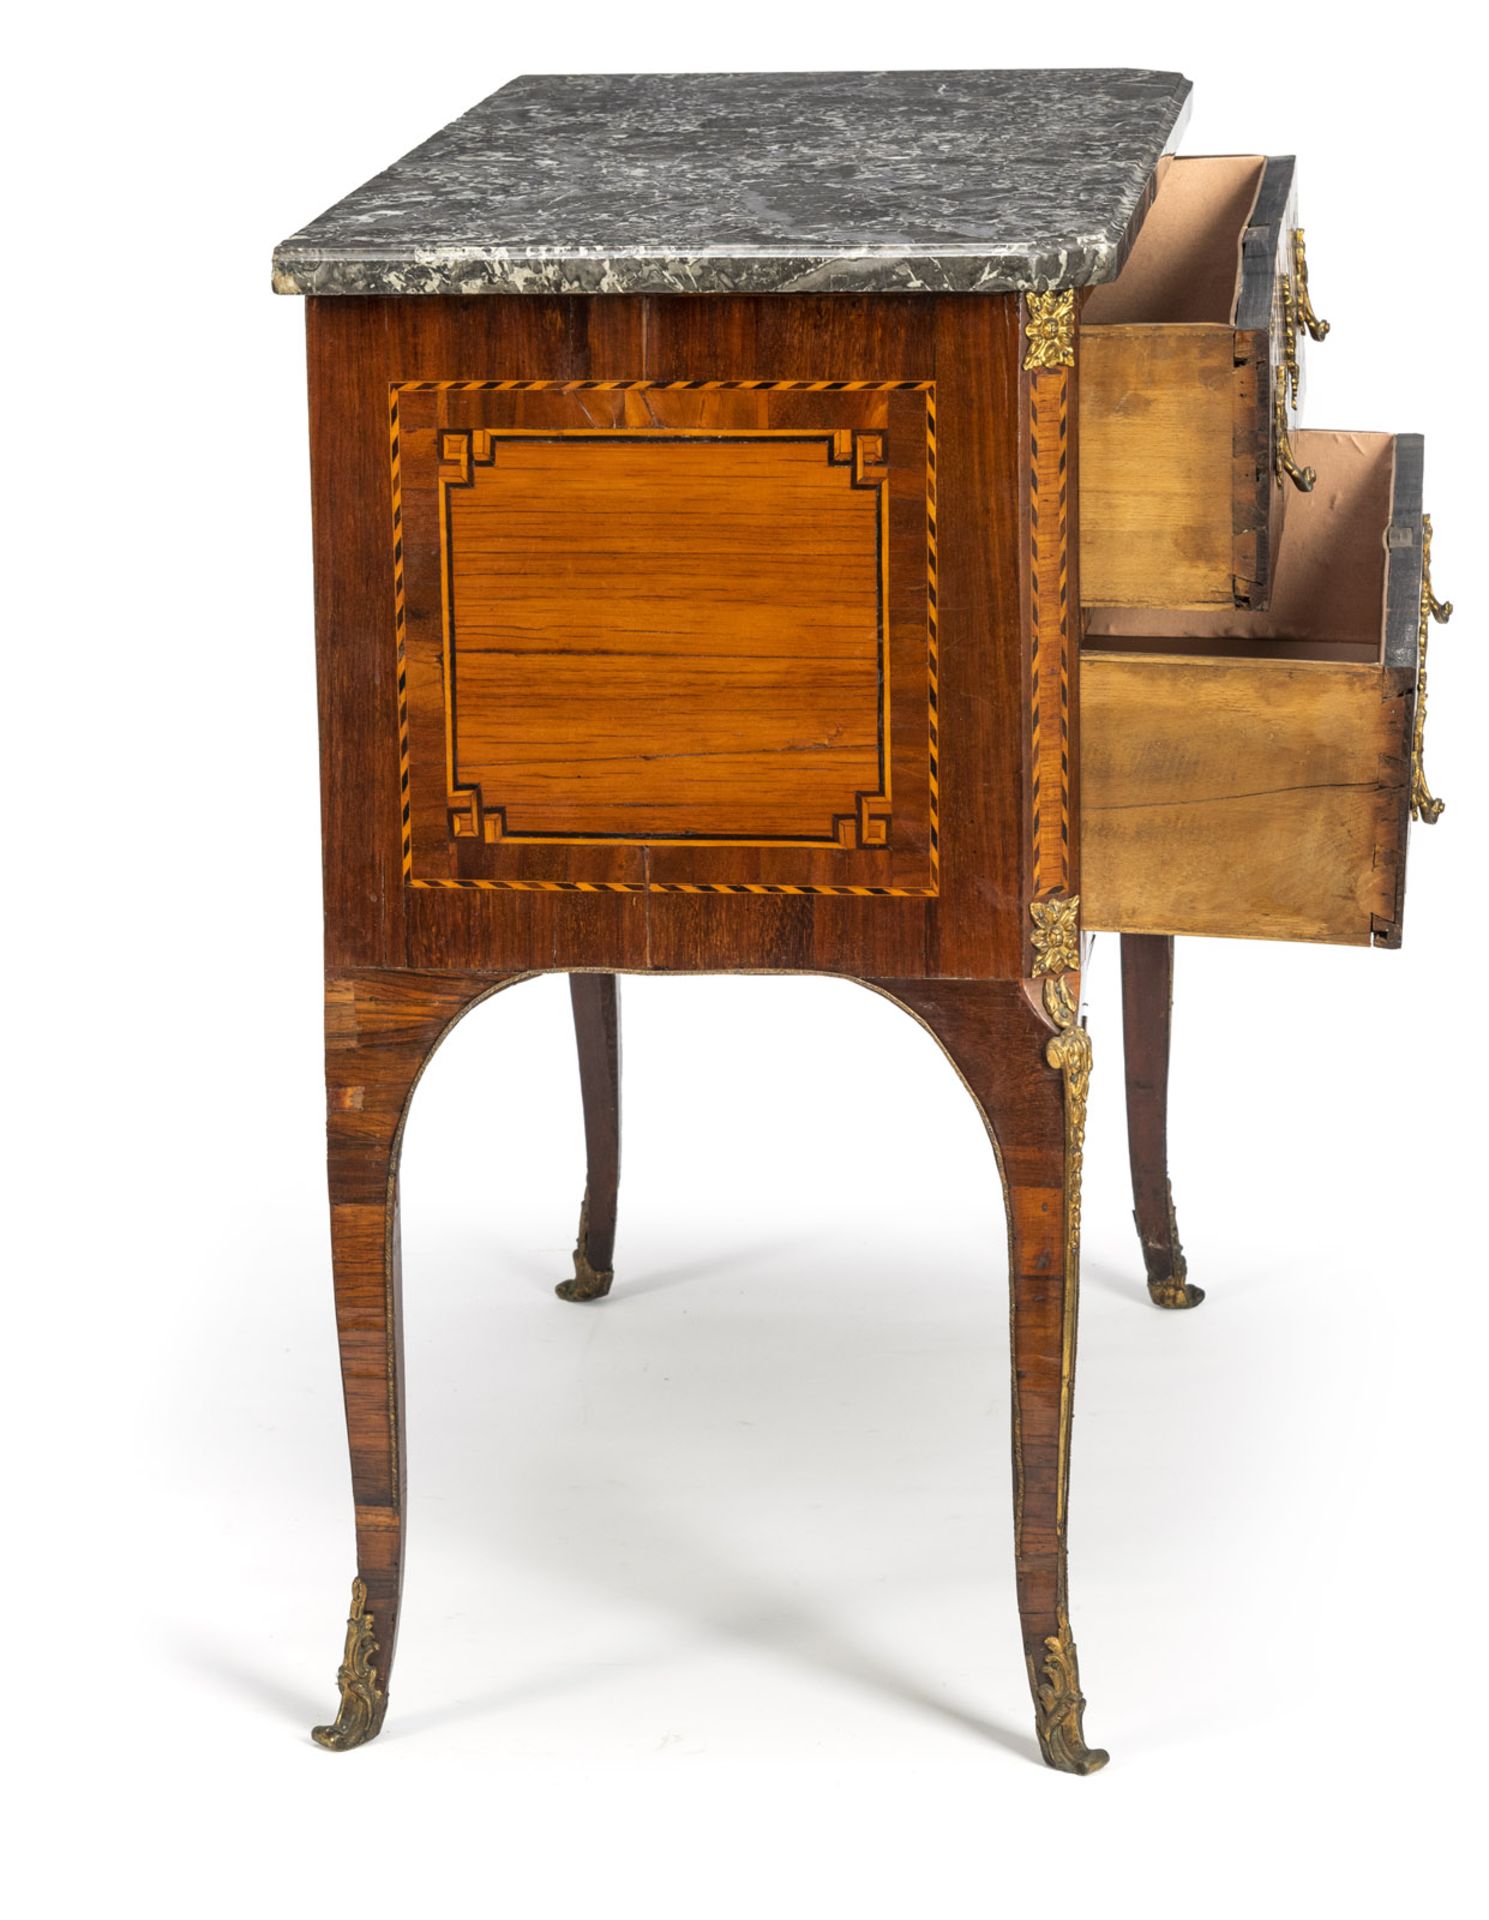 A FRENCH TRANSITIONAL STYLE ORMOLU MOUNTED KINGWOOD AMARANTH AND FRUITWOOD MARQUETRY COMMODE - Image 7 of 9